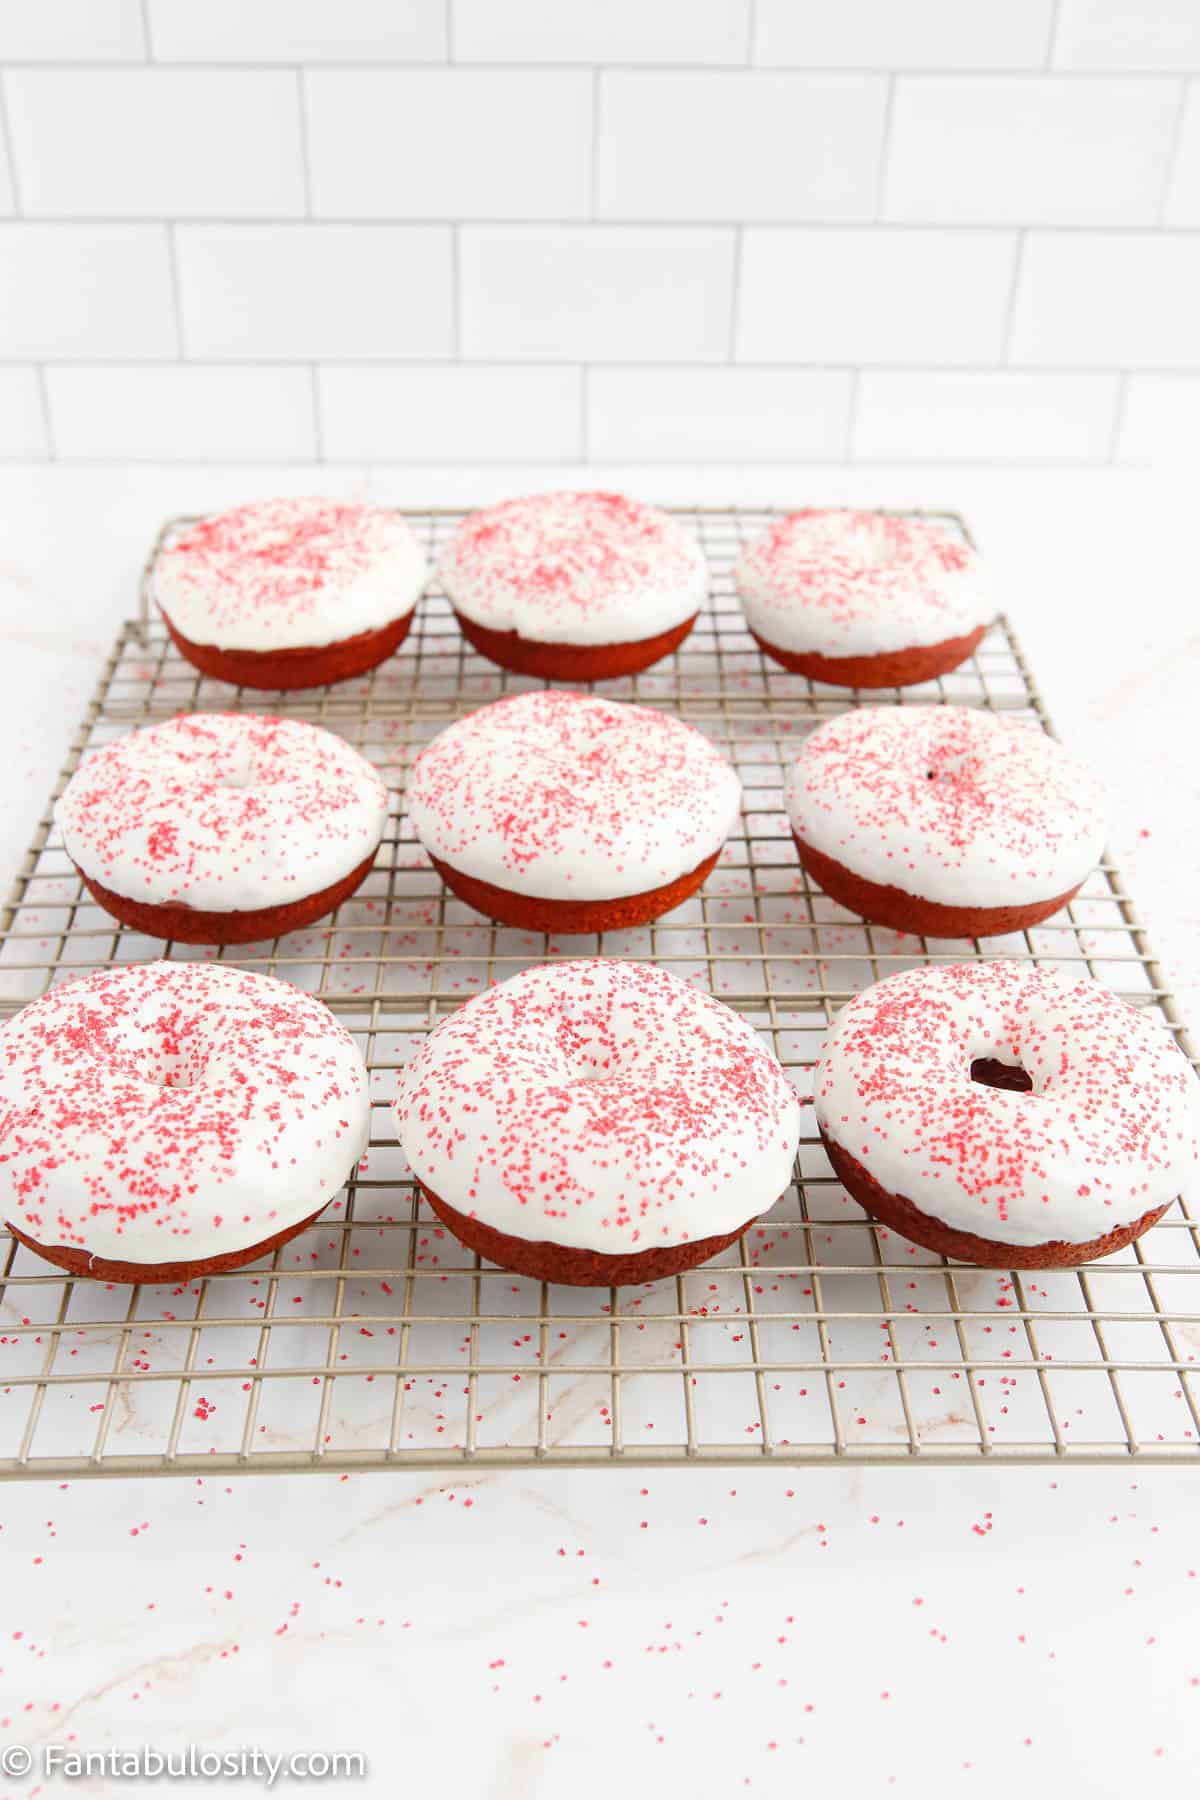 Iced red velvet donuts on a wire rack.